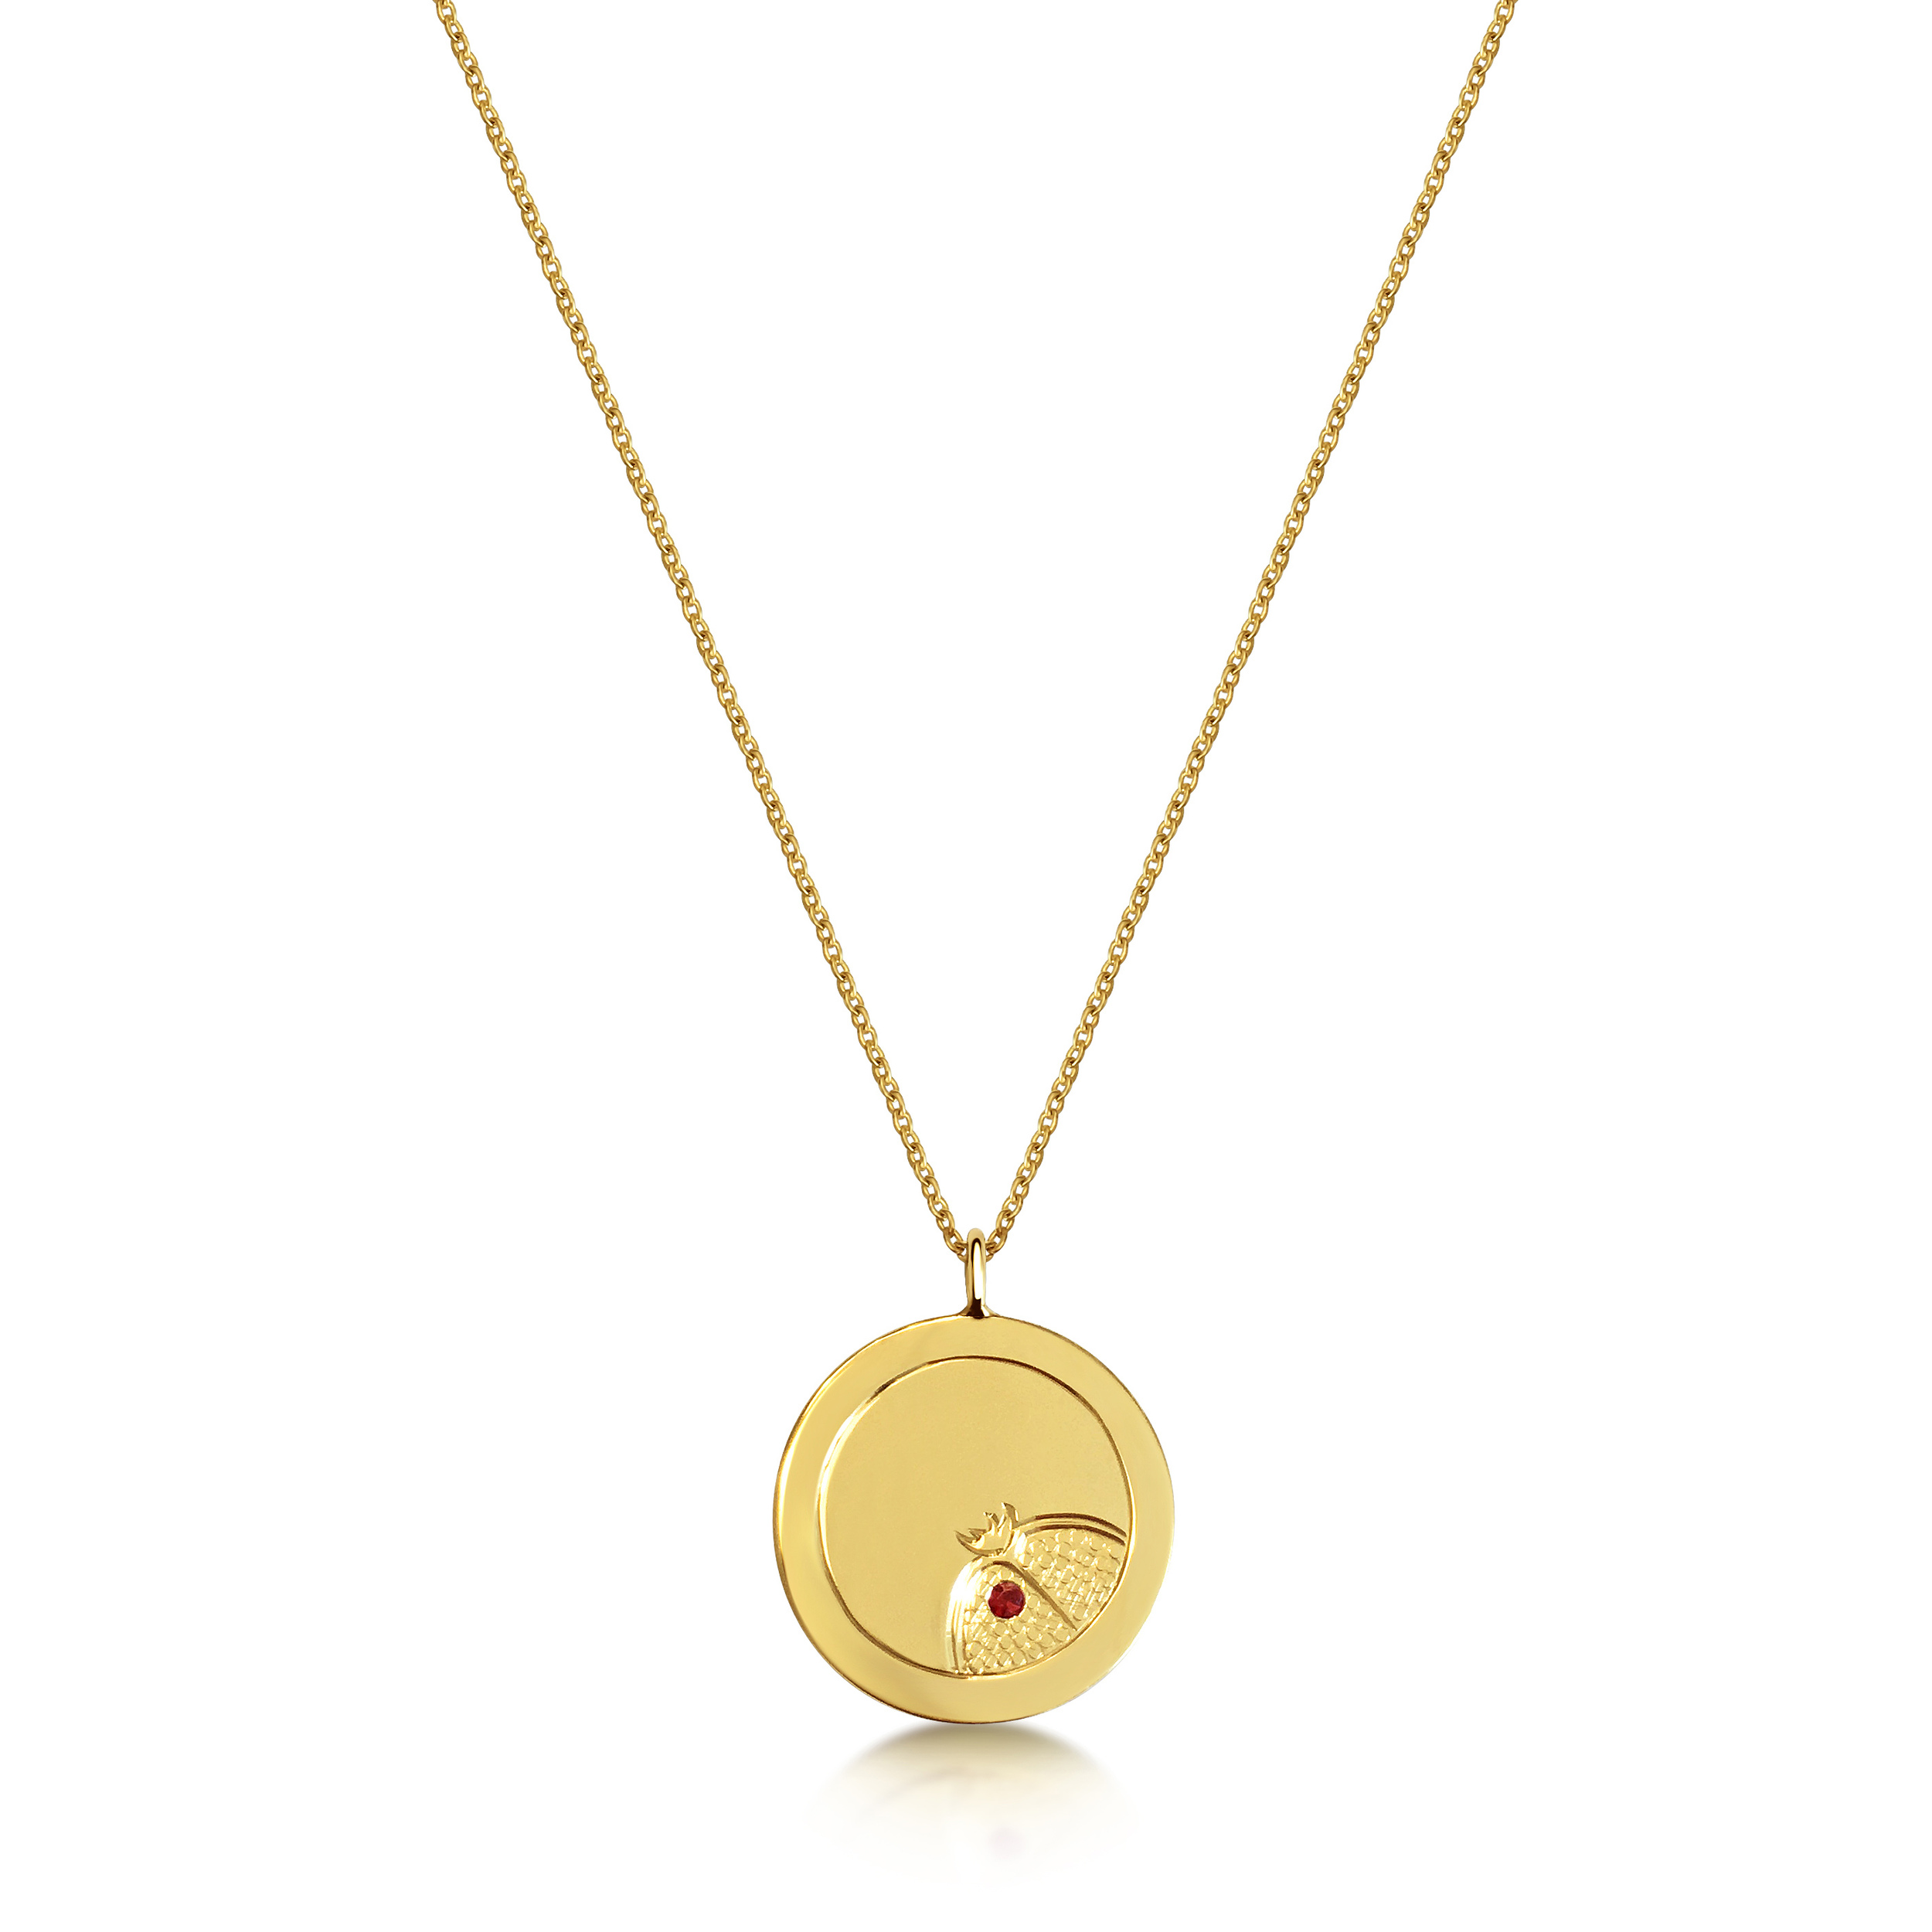 Bespoke-9ct-yellow-gold-disc-pendant-with-hand-engraved-pomegranate-2.jpg